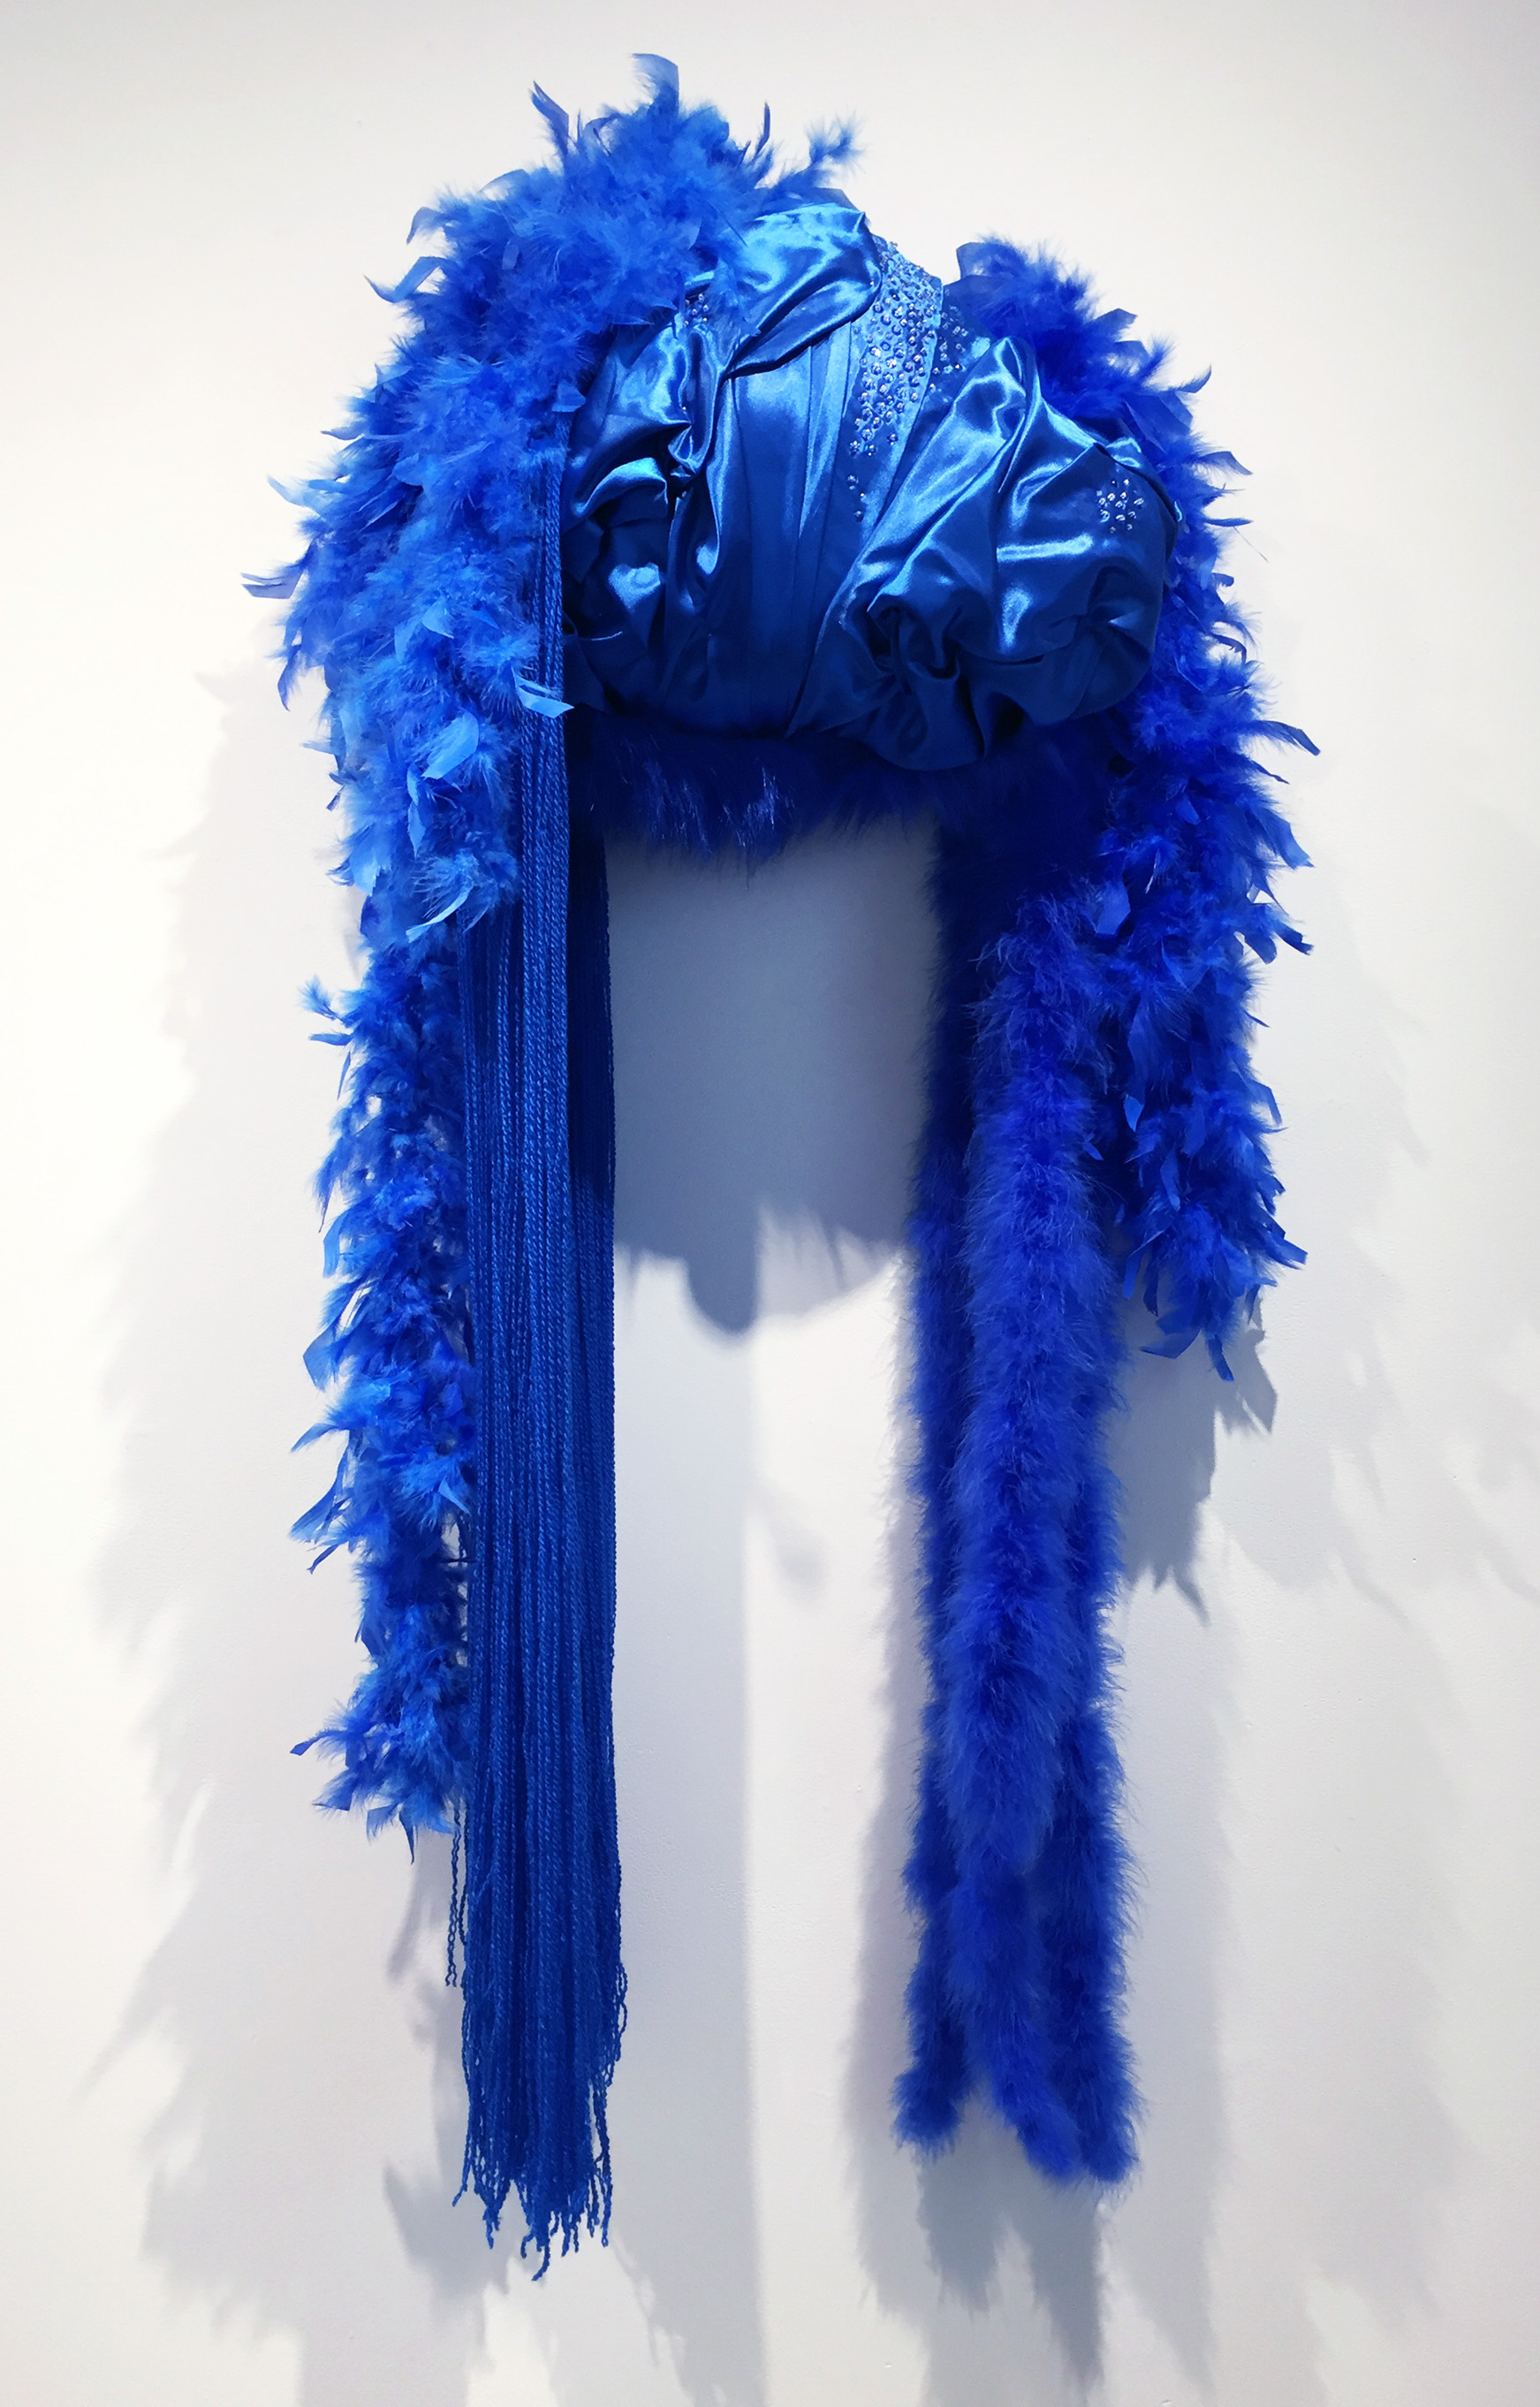    Gwenevere  , 2019   Polystyrene foam, fabrics, feathers, glass beads, sequins and dressmaker pins  56 x 24 x 11 inches     